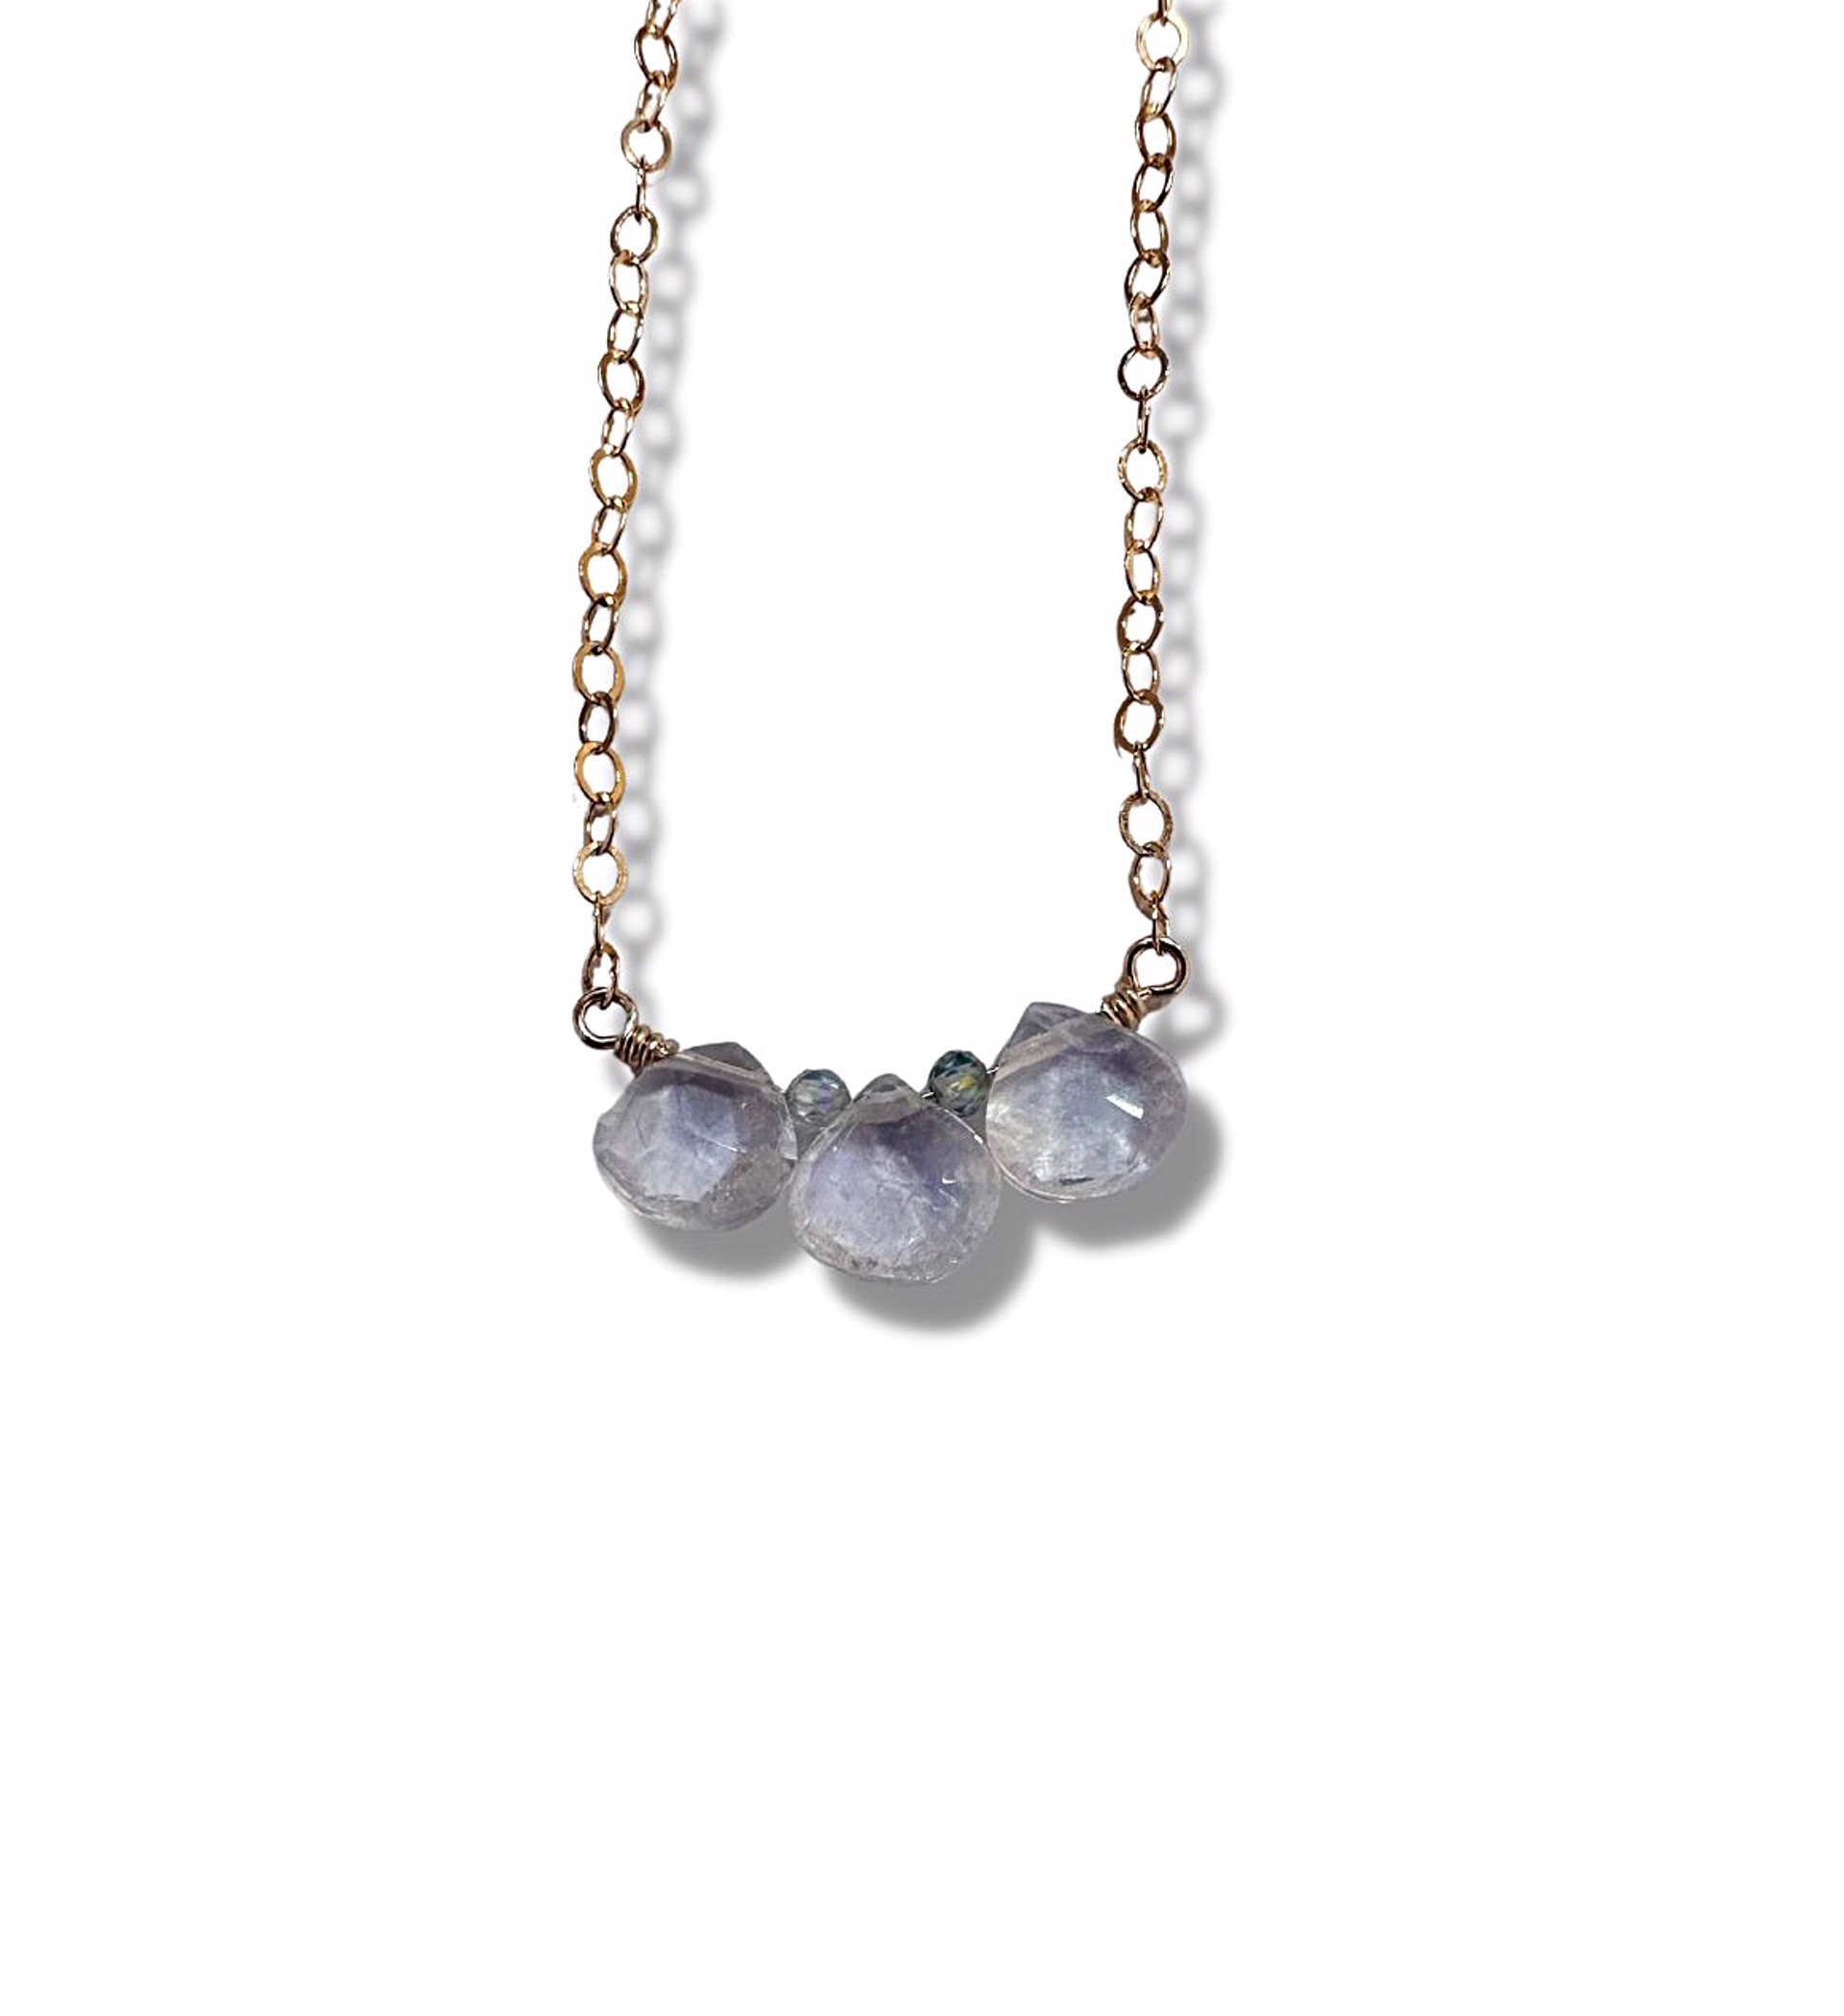 Necklace - Moonstone and Blue Zircon with 14K Gold Filling by Julia Balestracci